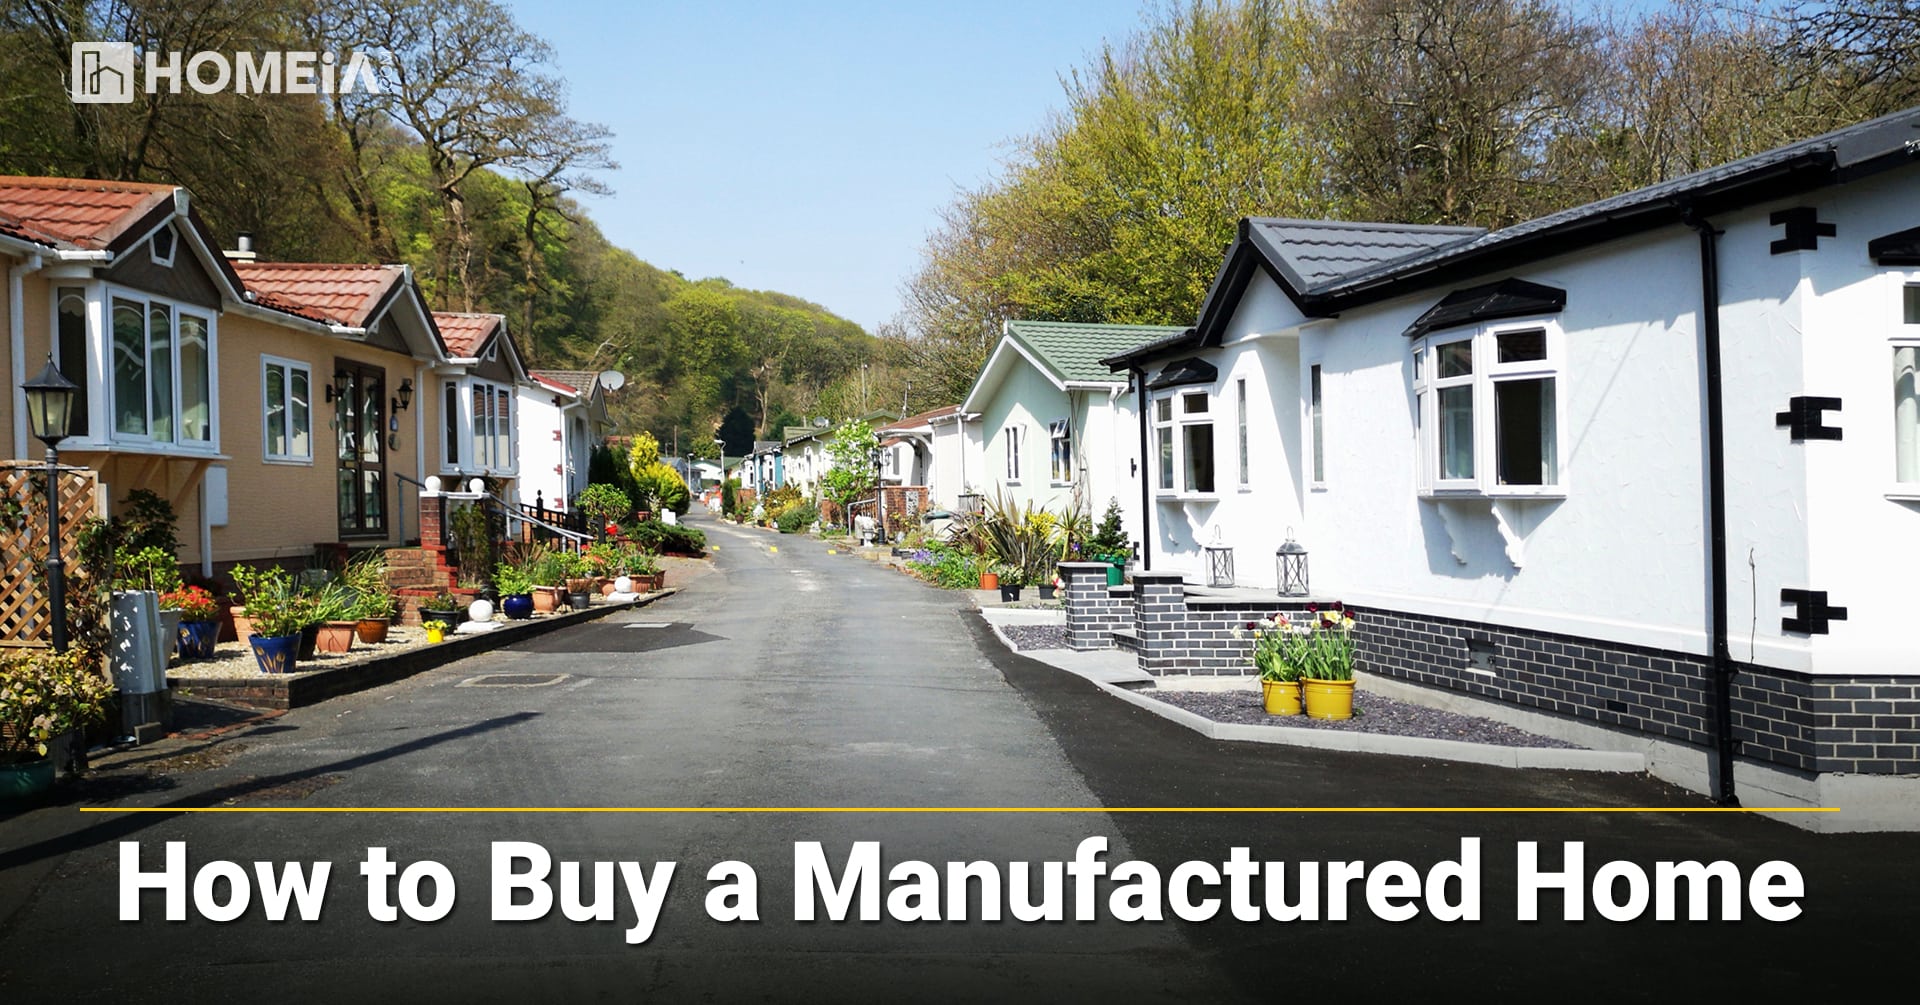 8 Key Steps to Buy a Manufactured Home